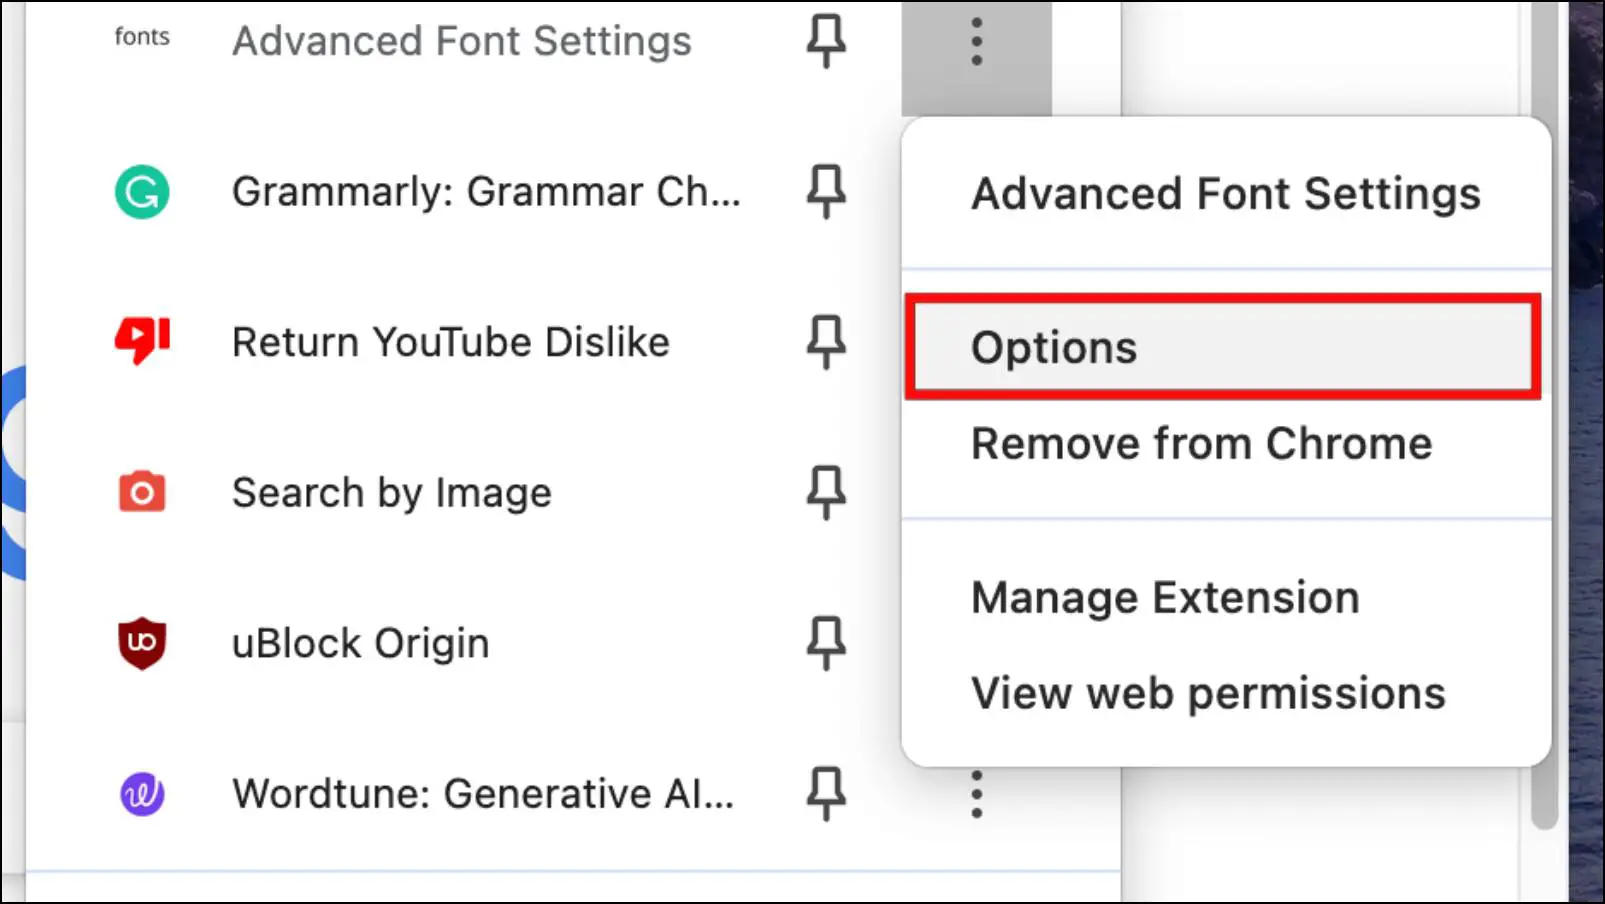 Go to Options to Make Changes to Advanced Font Settings